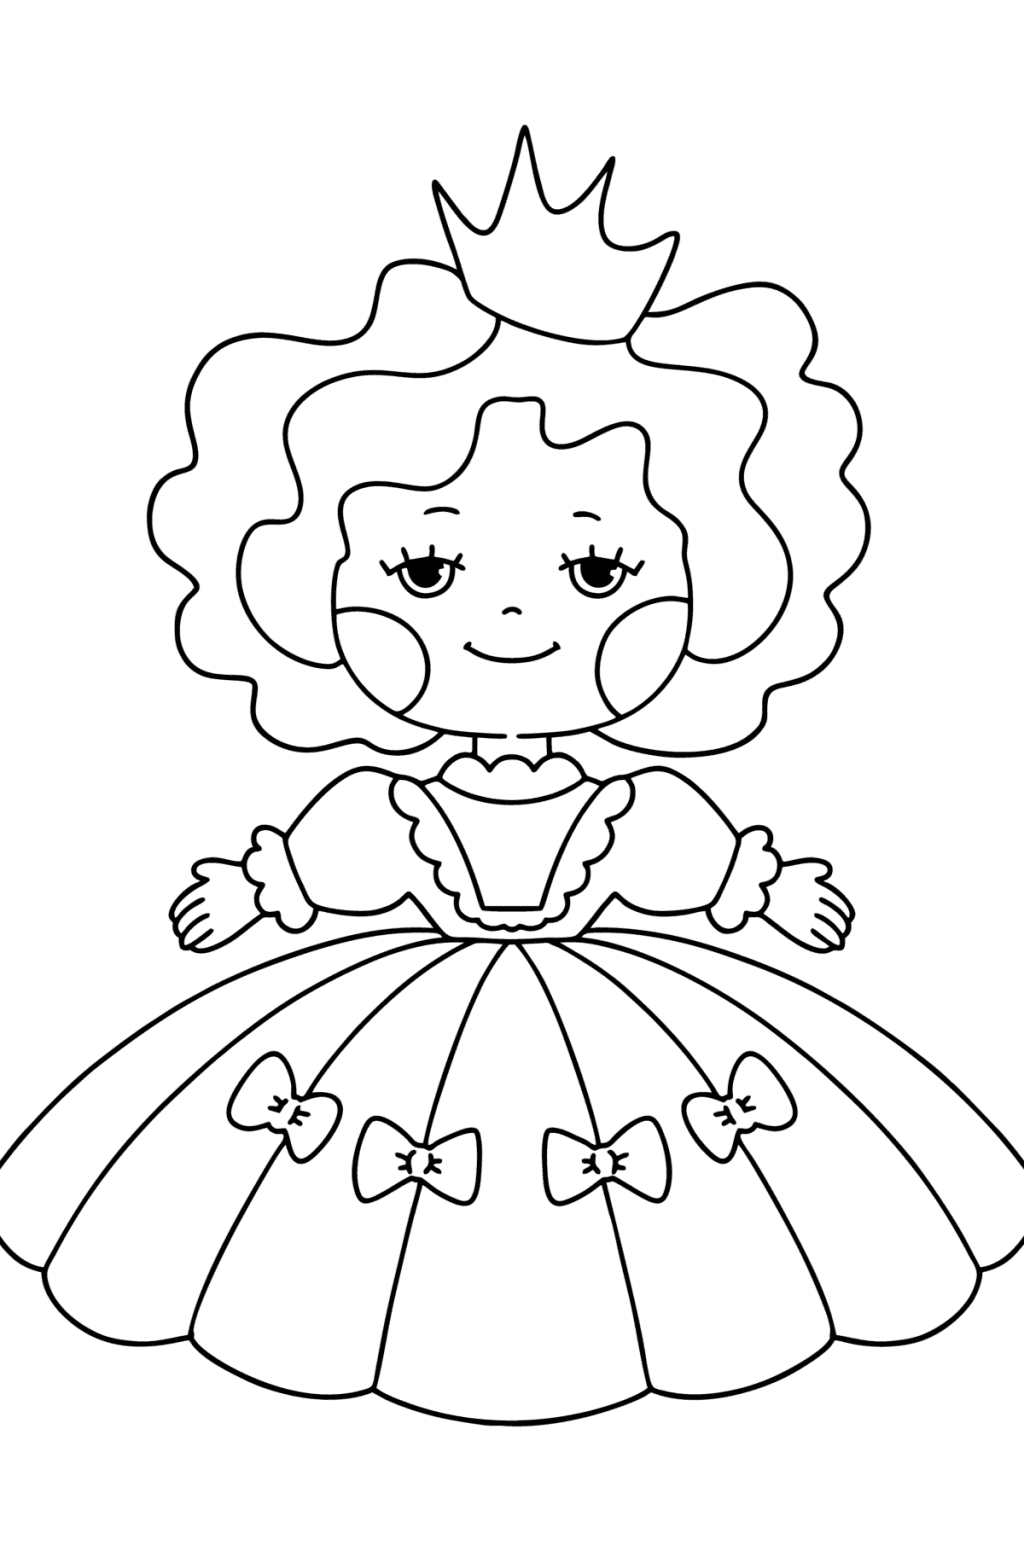 Princesses Coloring Pages ♥ Online or Printable for Free!